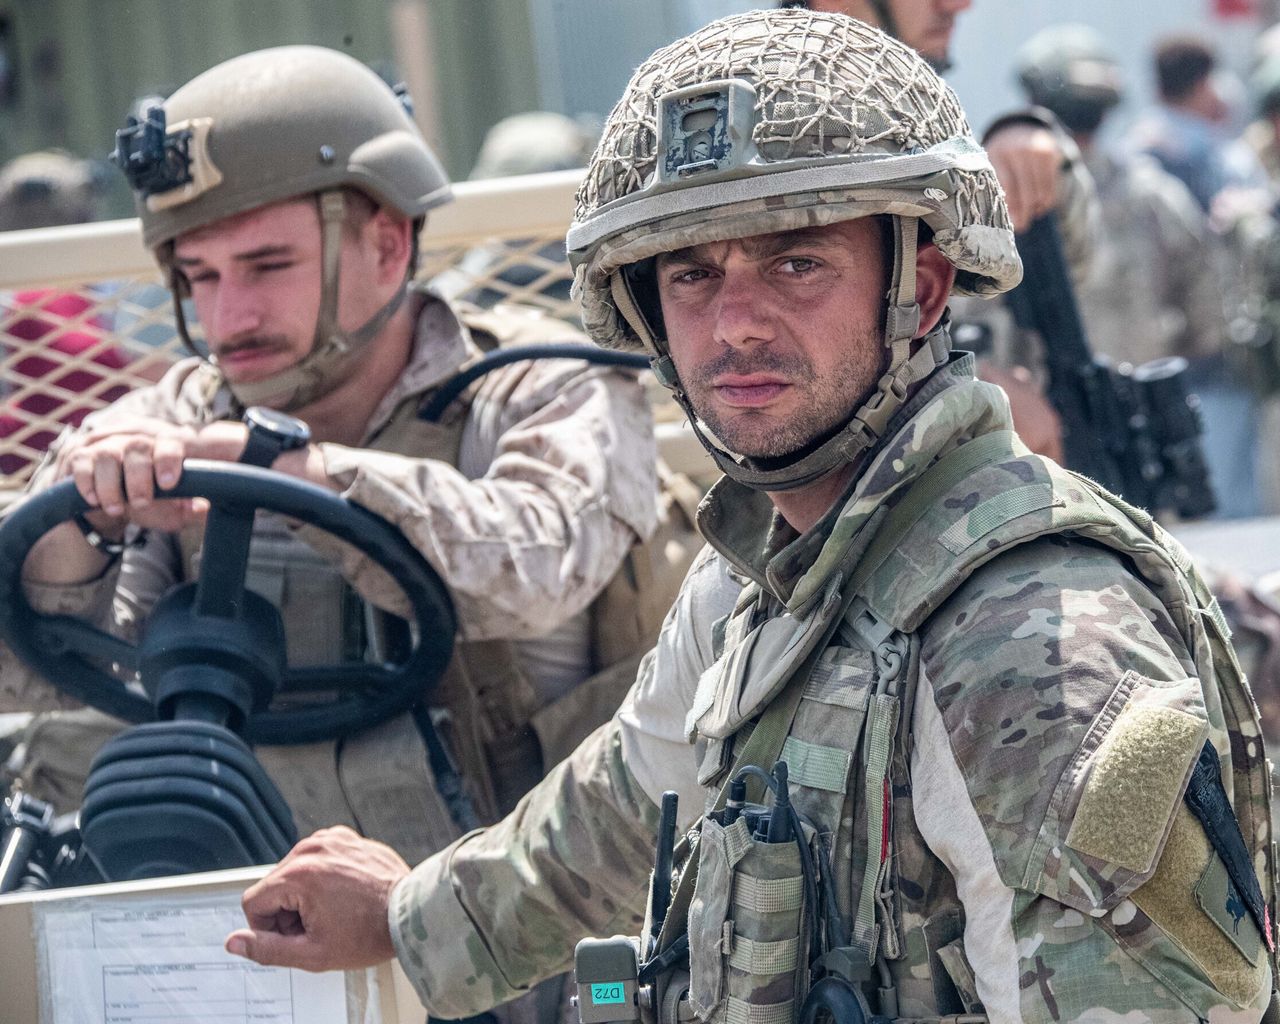 n this handout image provided by the Ministry of Defence, the British armed forces work with the U.S. military to evacuate eligible civilians out of Afghanistan on August 21, 2021 